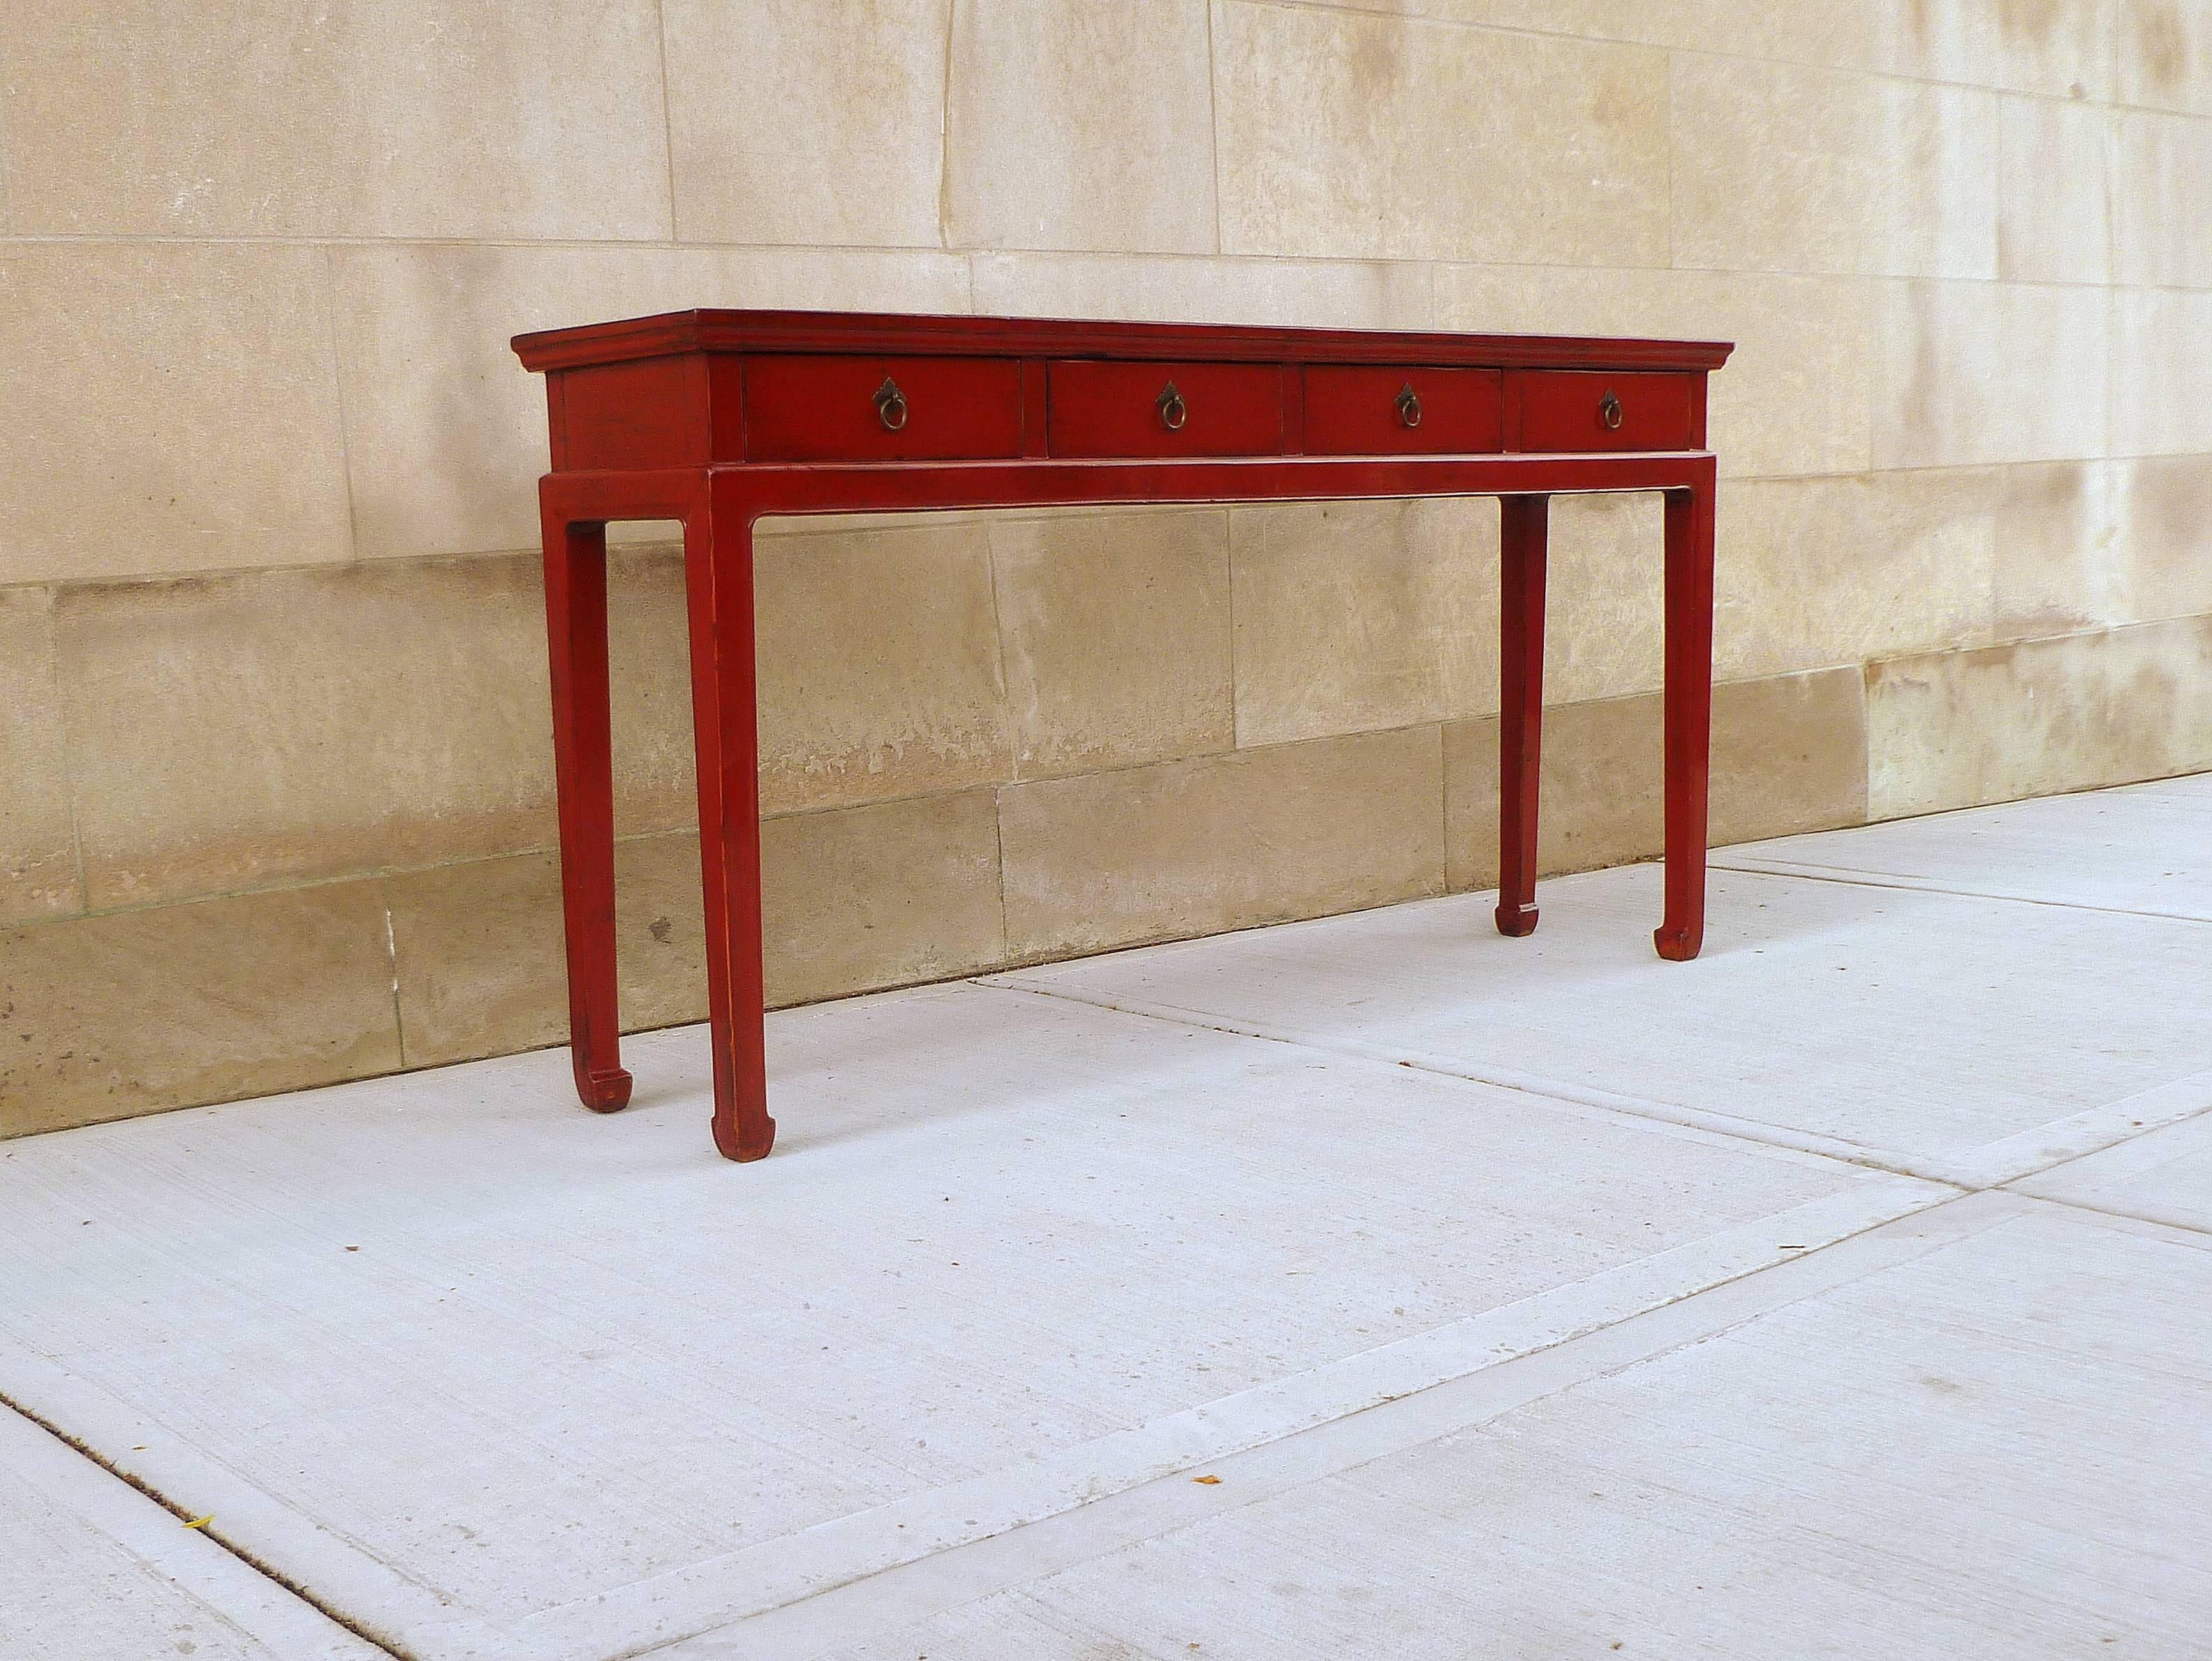 Early 20th Century Red Lacquer Console Table with Drawers